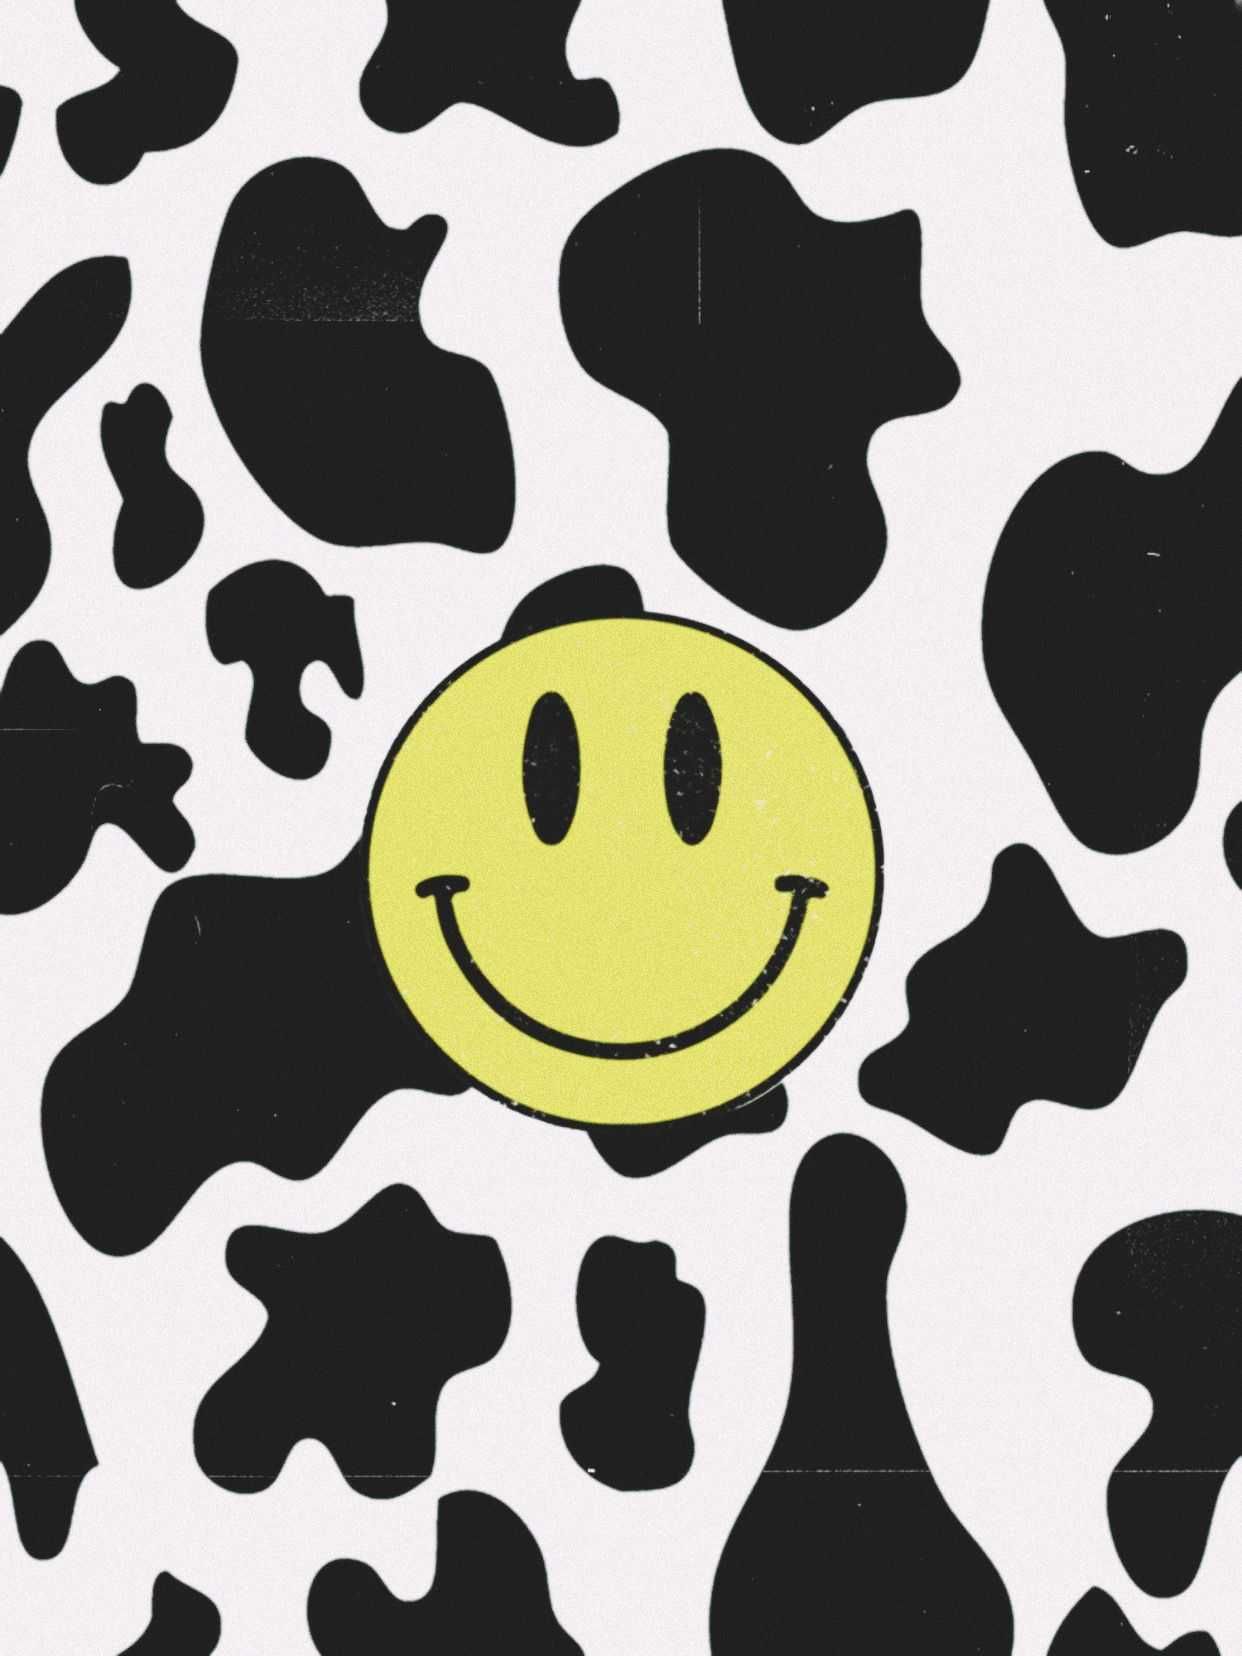 Smiley Face Wallpaper Browse Smiley Face Wallpaper with collections of Black, iPhone, Pink, Simple,. Cow print wallpaper, Cow wallpaper, iPhone wallpaper pattern